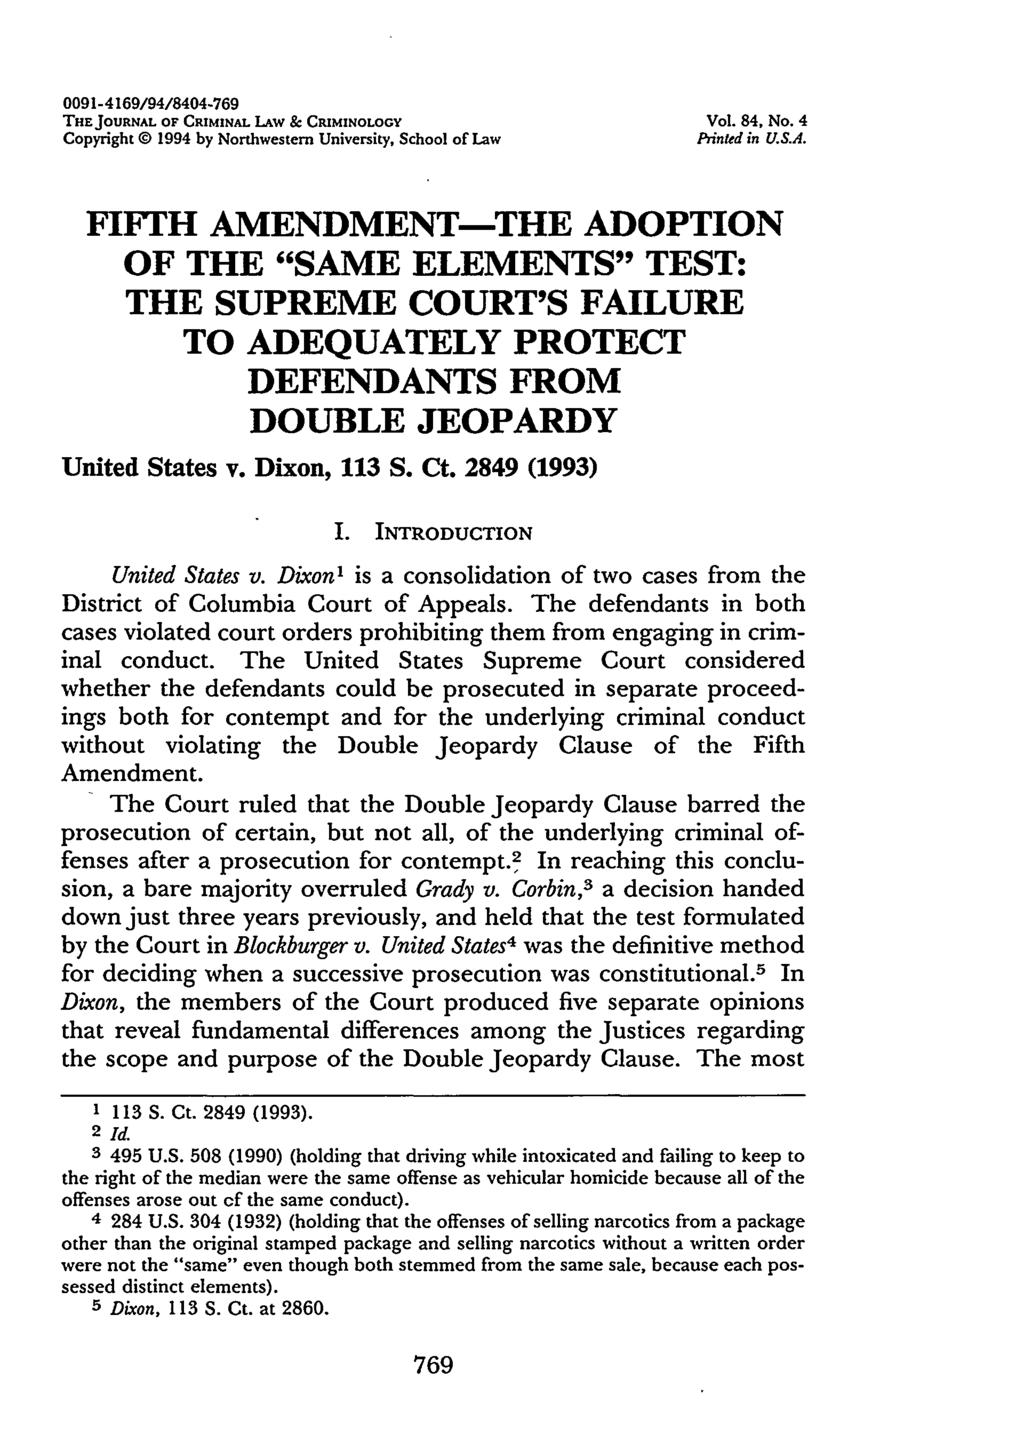 0091-4169/94/8404-769 THE JOURNAL OF CRIMINAL LAW & CRIMINOLOGY Vol. 84, No. 4 Copyright @ 1994 by Northwestern University, School of Law Printed in U.S.A. FIFTH AMENDMENT-THE ADOPTION OF THE "SAME ELEMENTS" TEST: THE SUPREME COURT'S FAILURE TO ADEQUATELY PROTECT DEFENDANTS FROM DOUBLE JEOPARDY United States v.